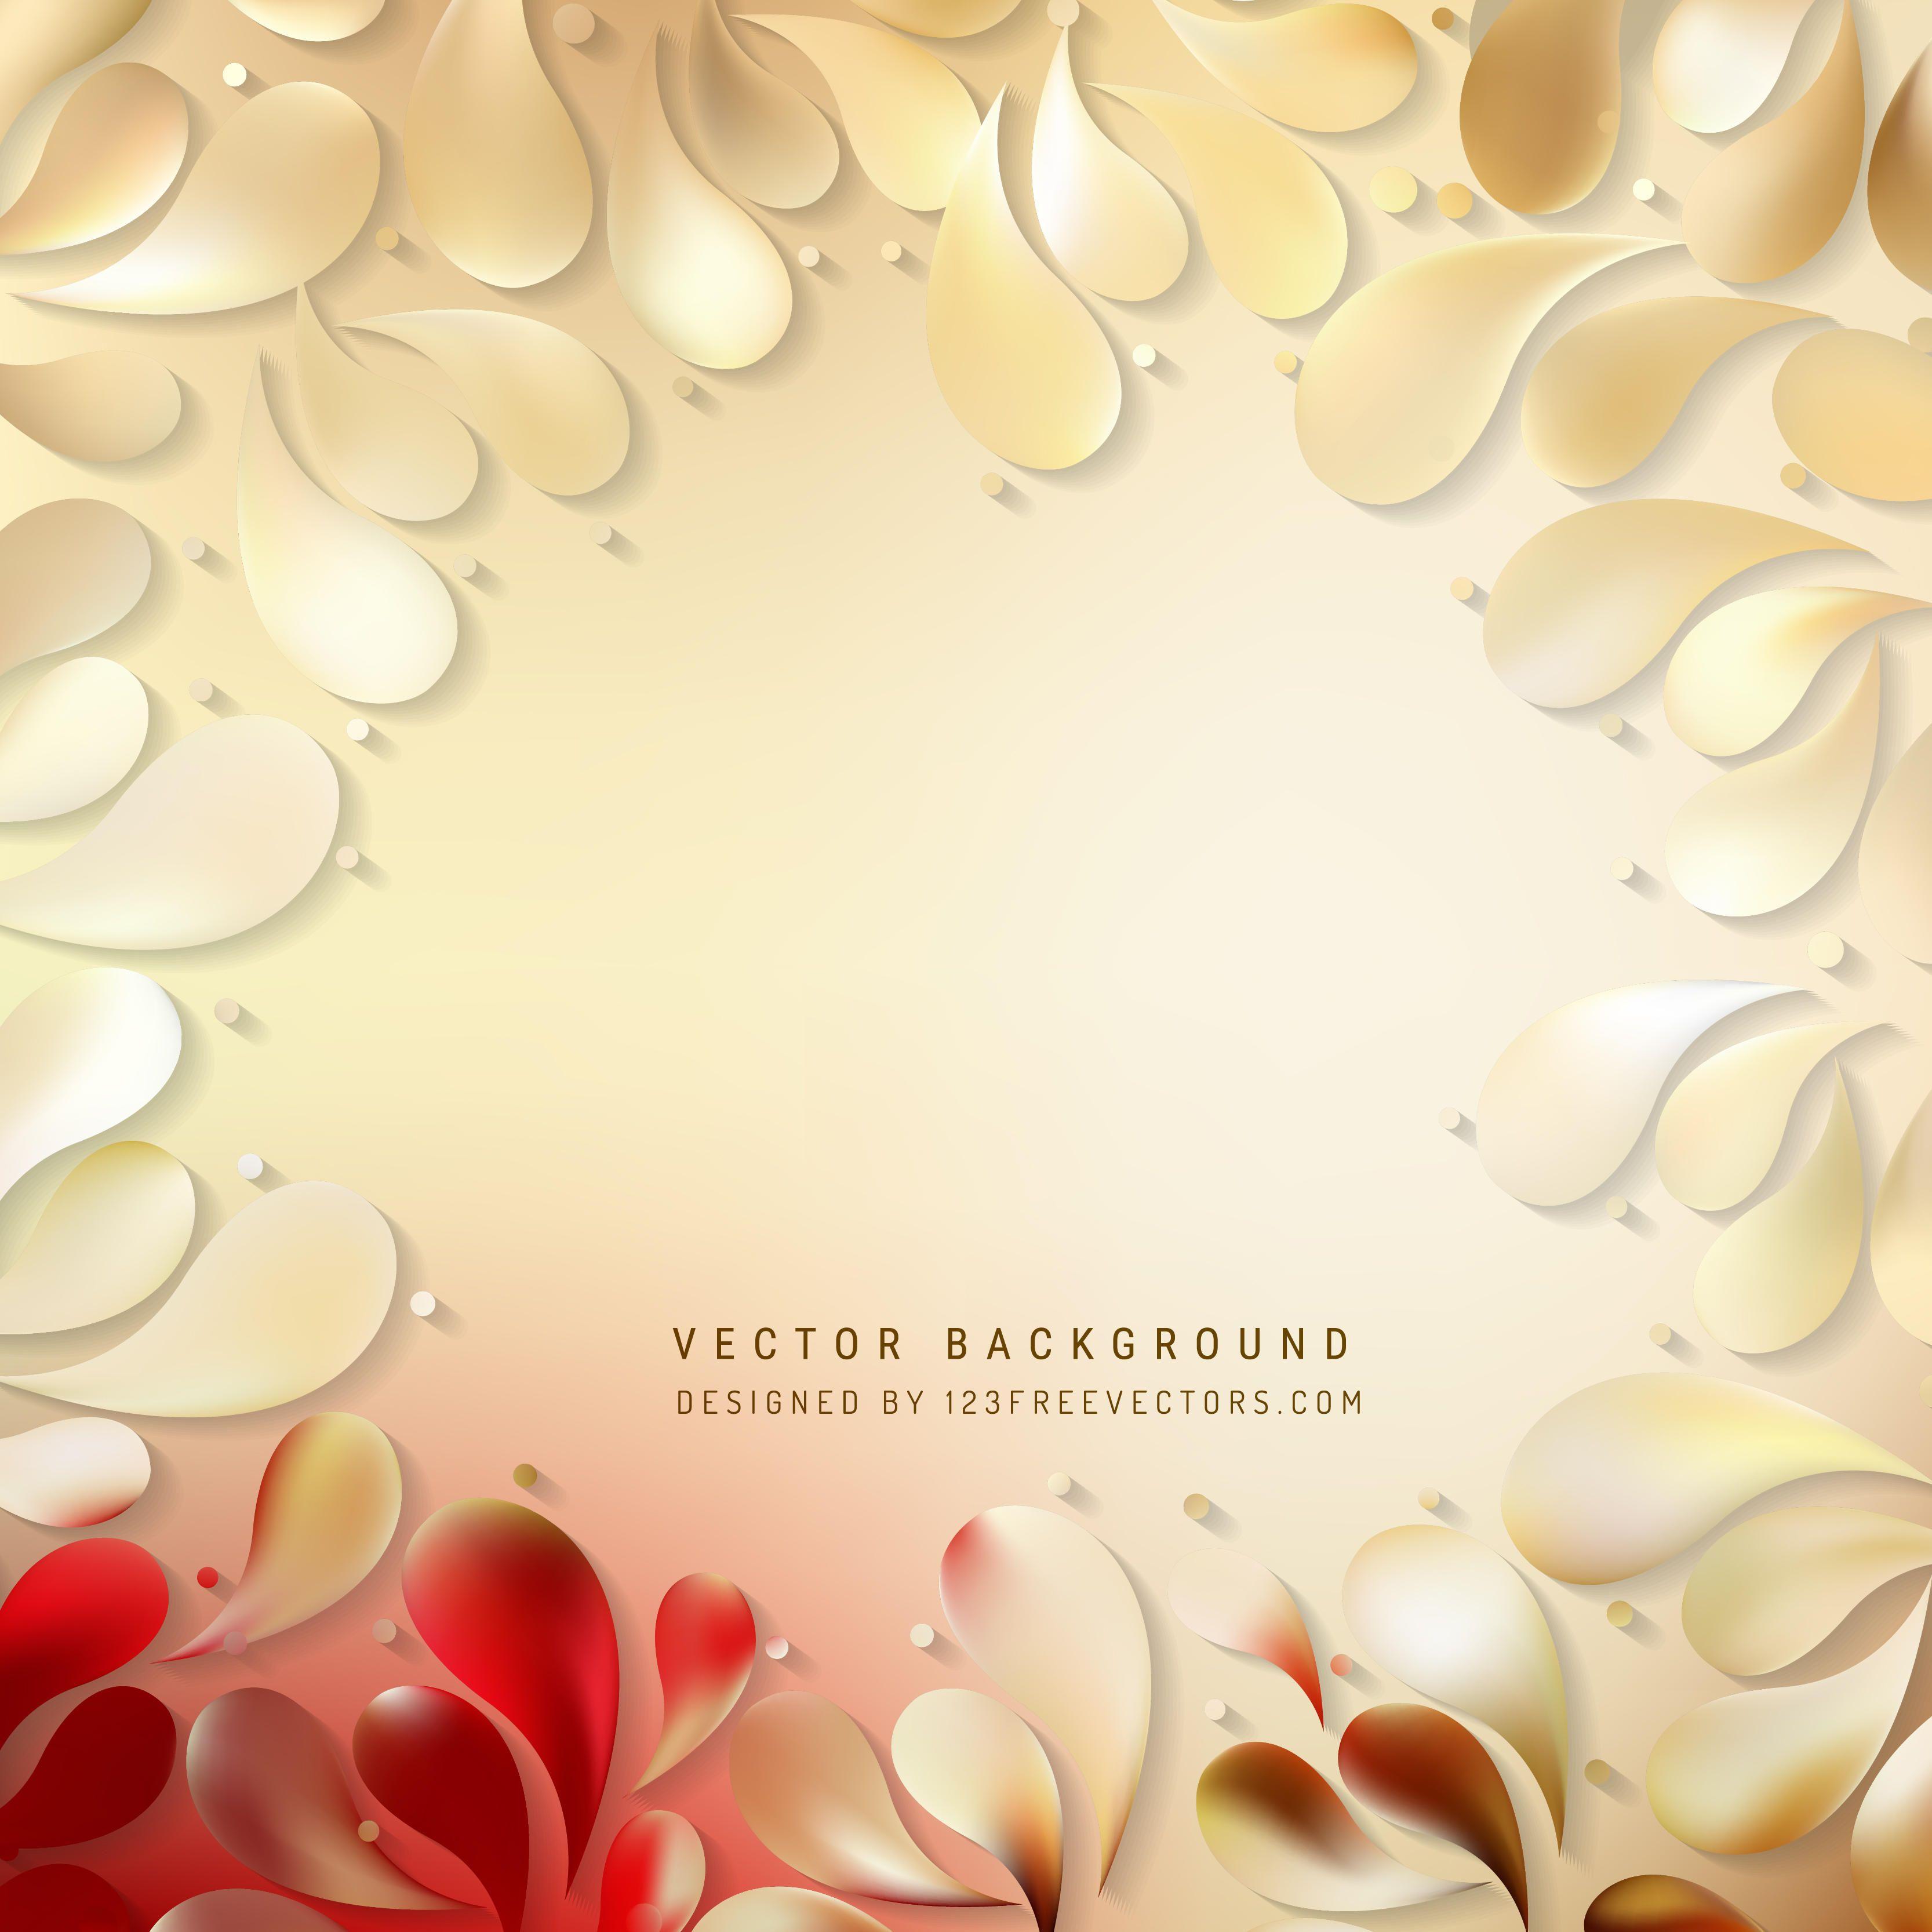 Abstract Floral Drops BackgroundFreevectors